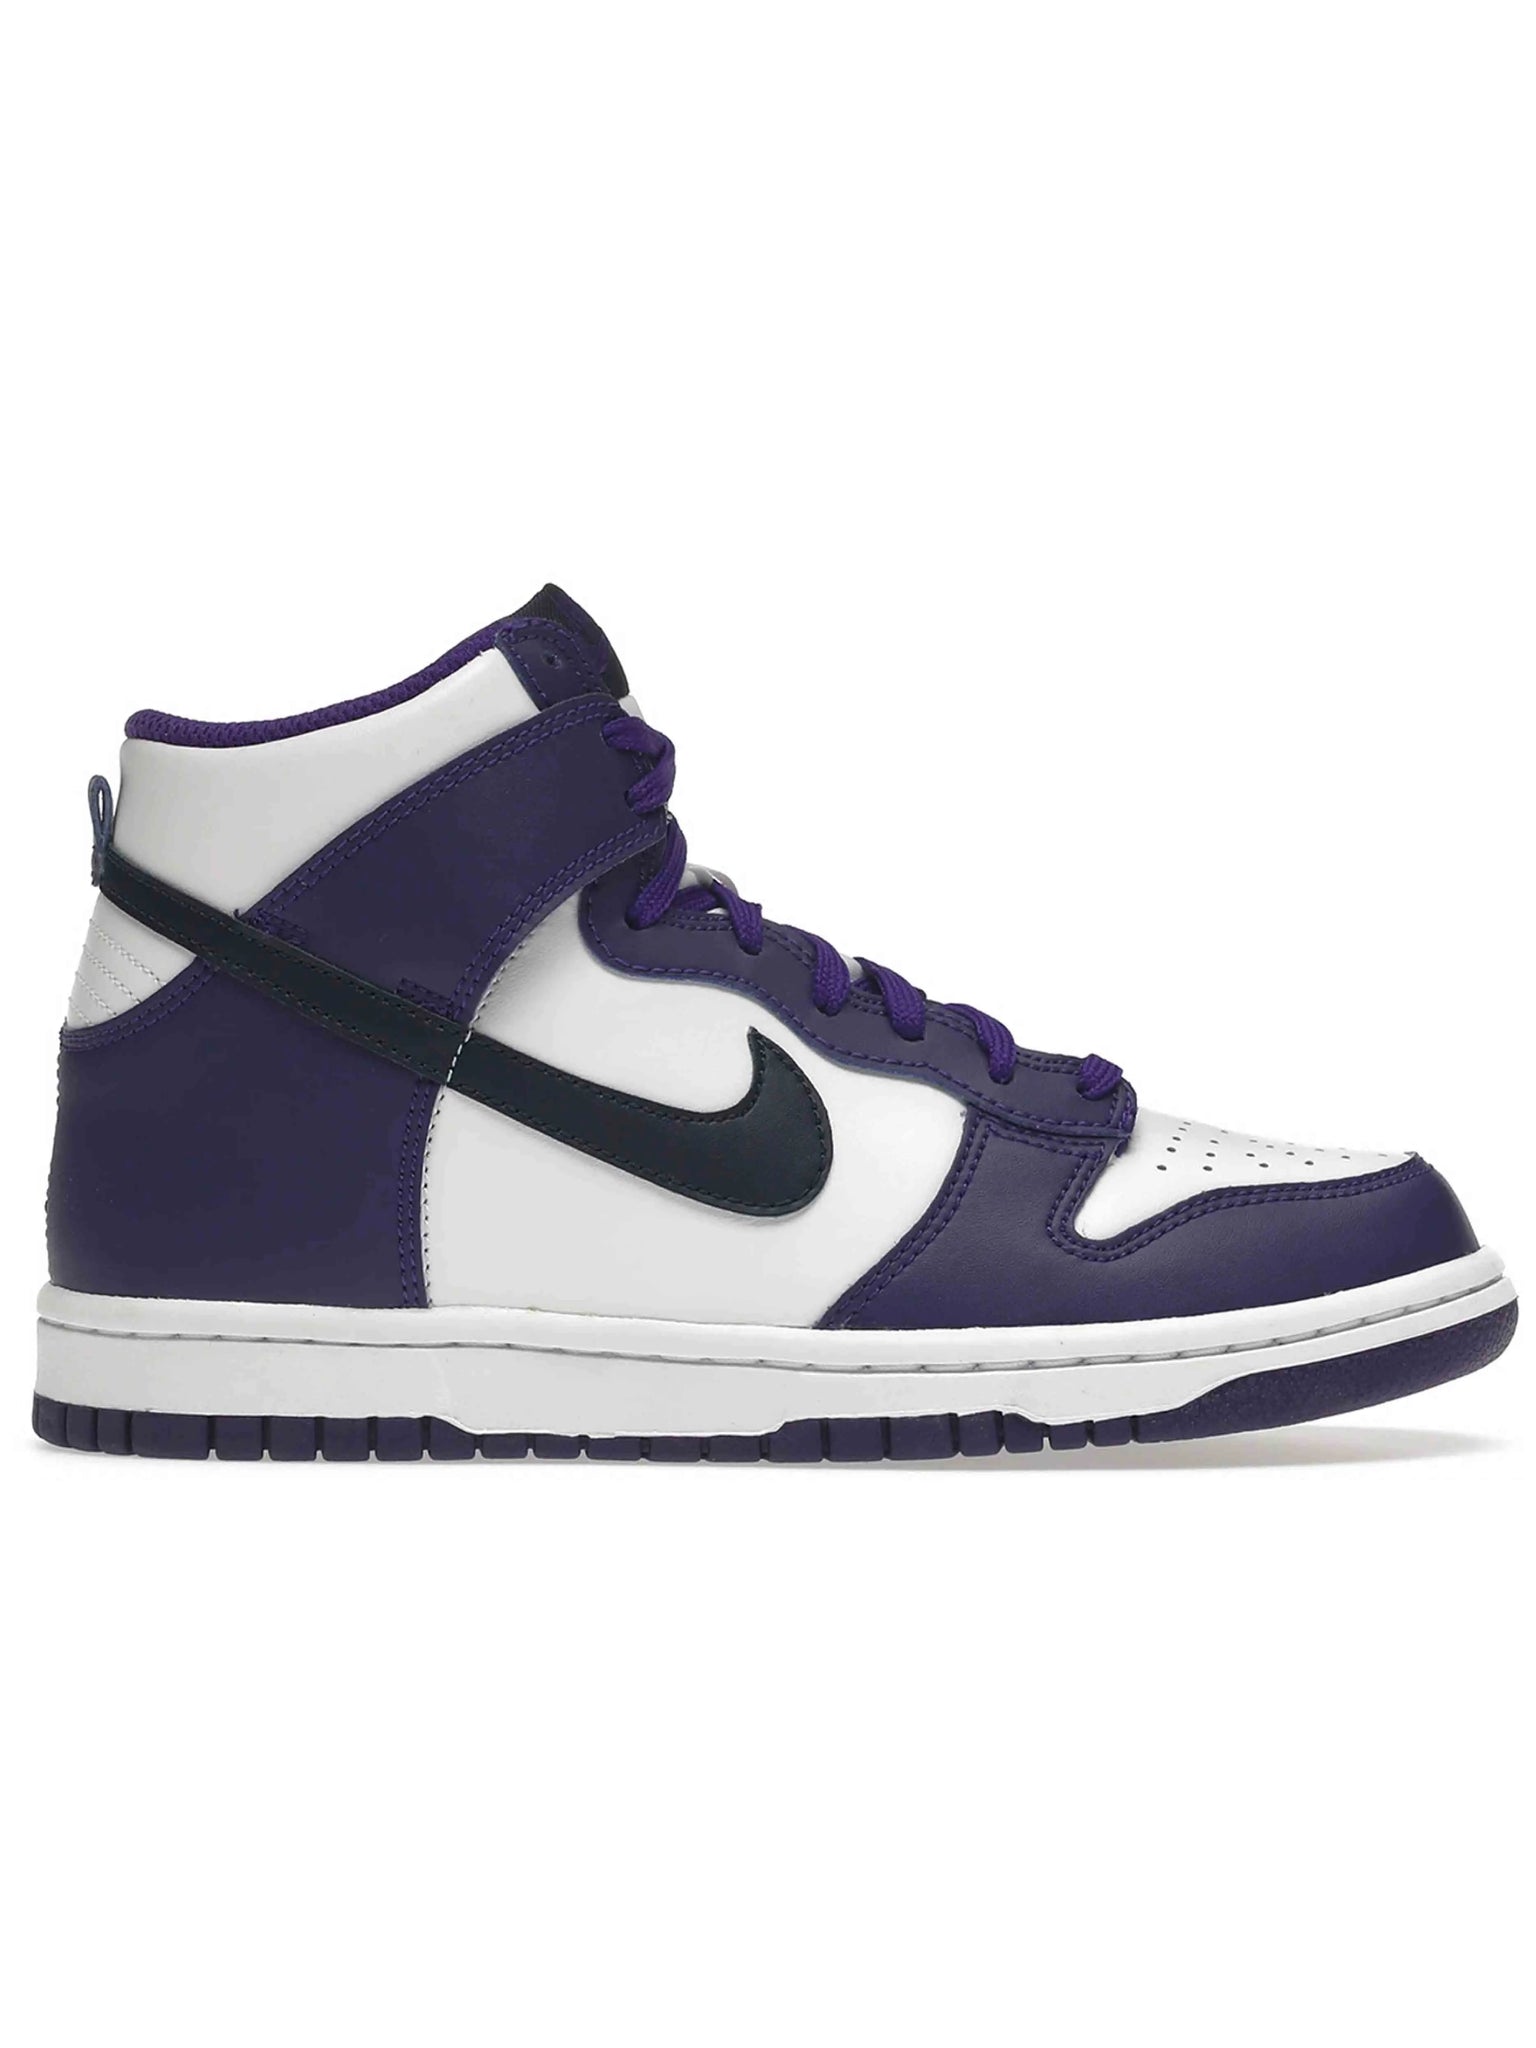 Nike Dunk High Electro Purple Midnight Navy (GS) Prior